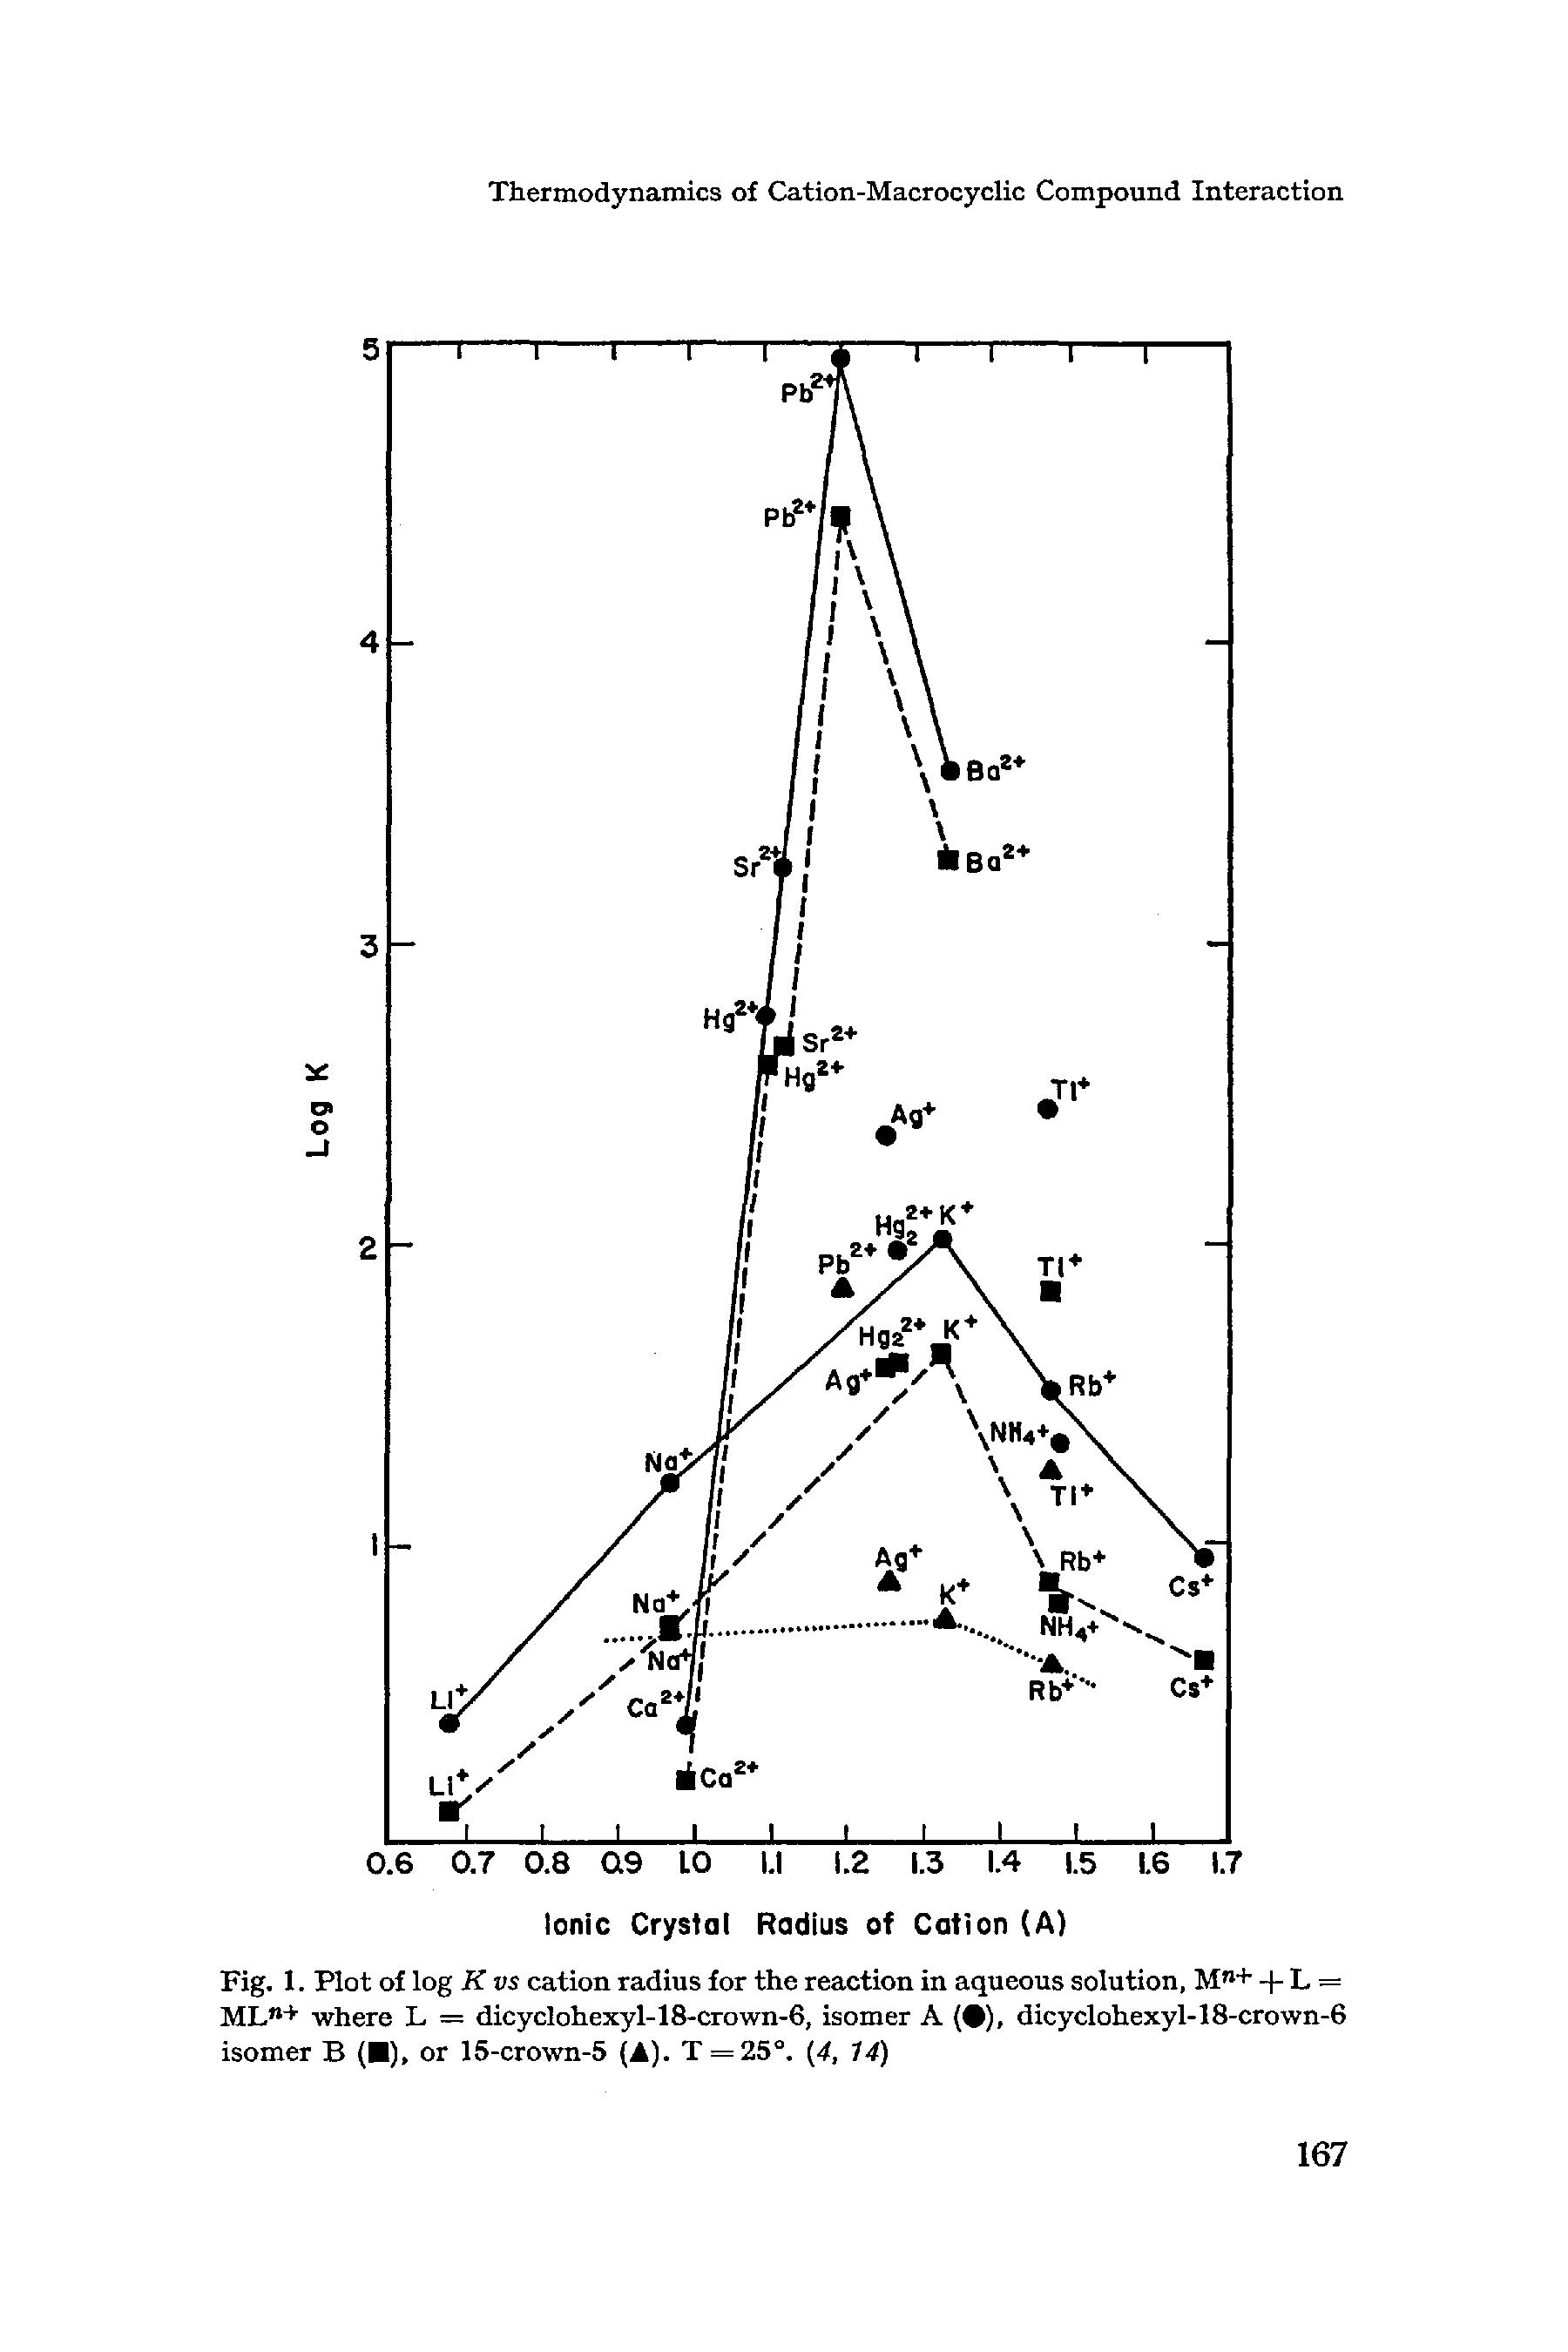 Fig. 1. Plot of log K vs cation radius for the reaction in aqueous solution, Mn+ + L = MLn+ where L = dicyclohexyl- 18-crown-6, isomer A ( ), dicyclohexyl- 18-crown-6 isomer B ( ), or 15-crown-5 (A). T = 25°. (4, 14)...